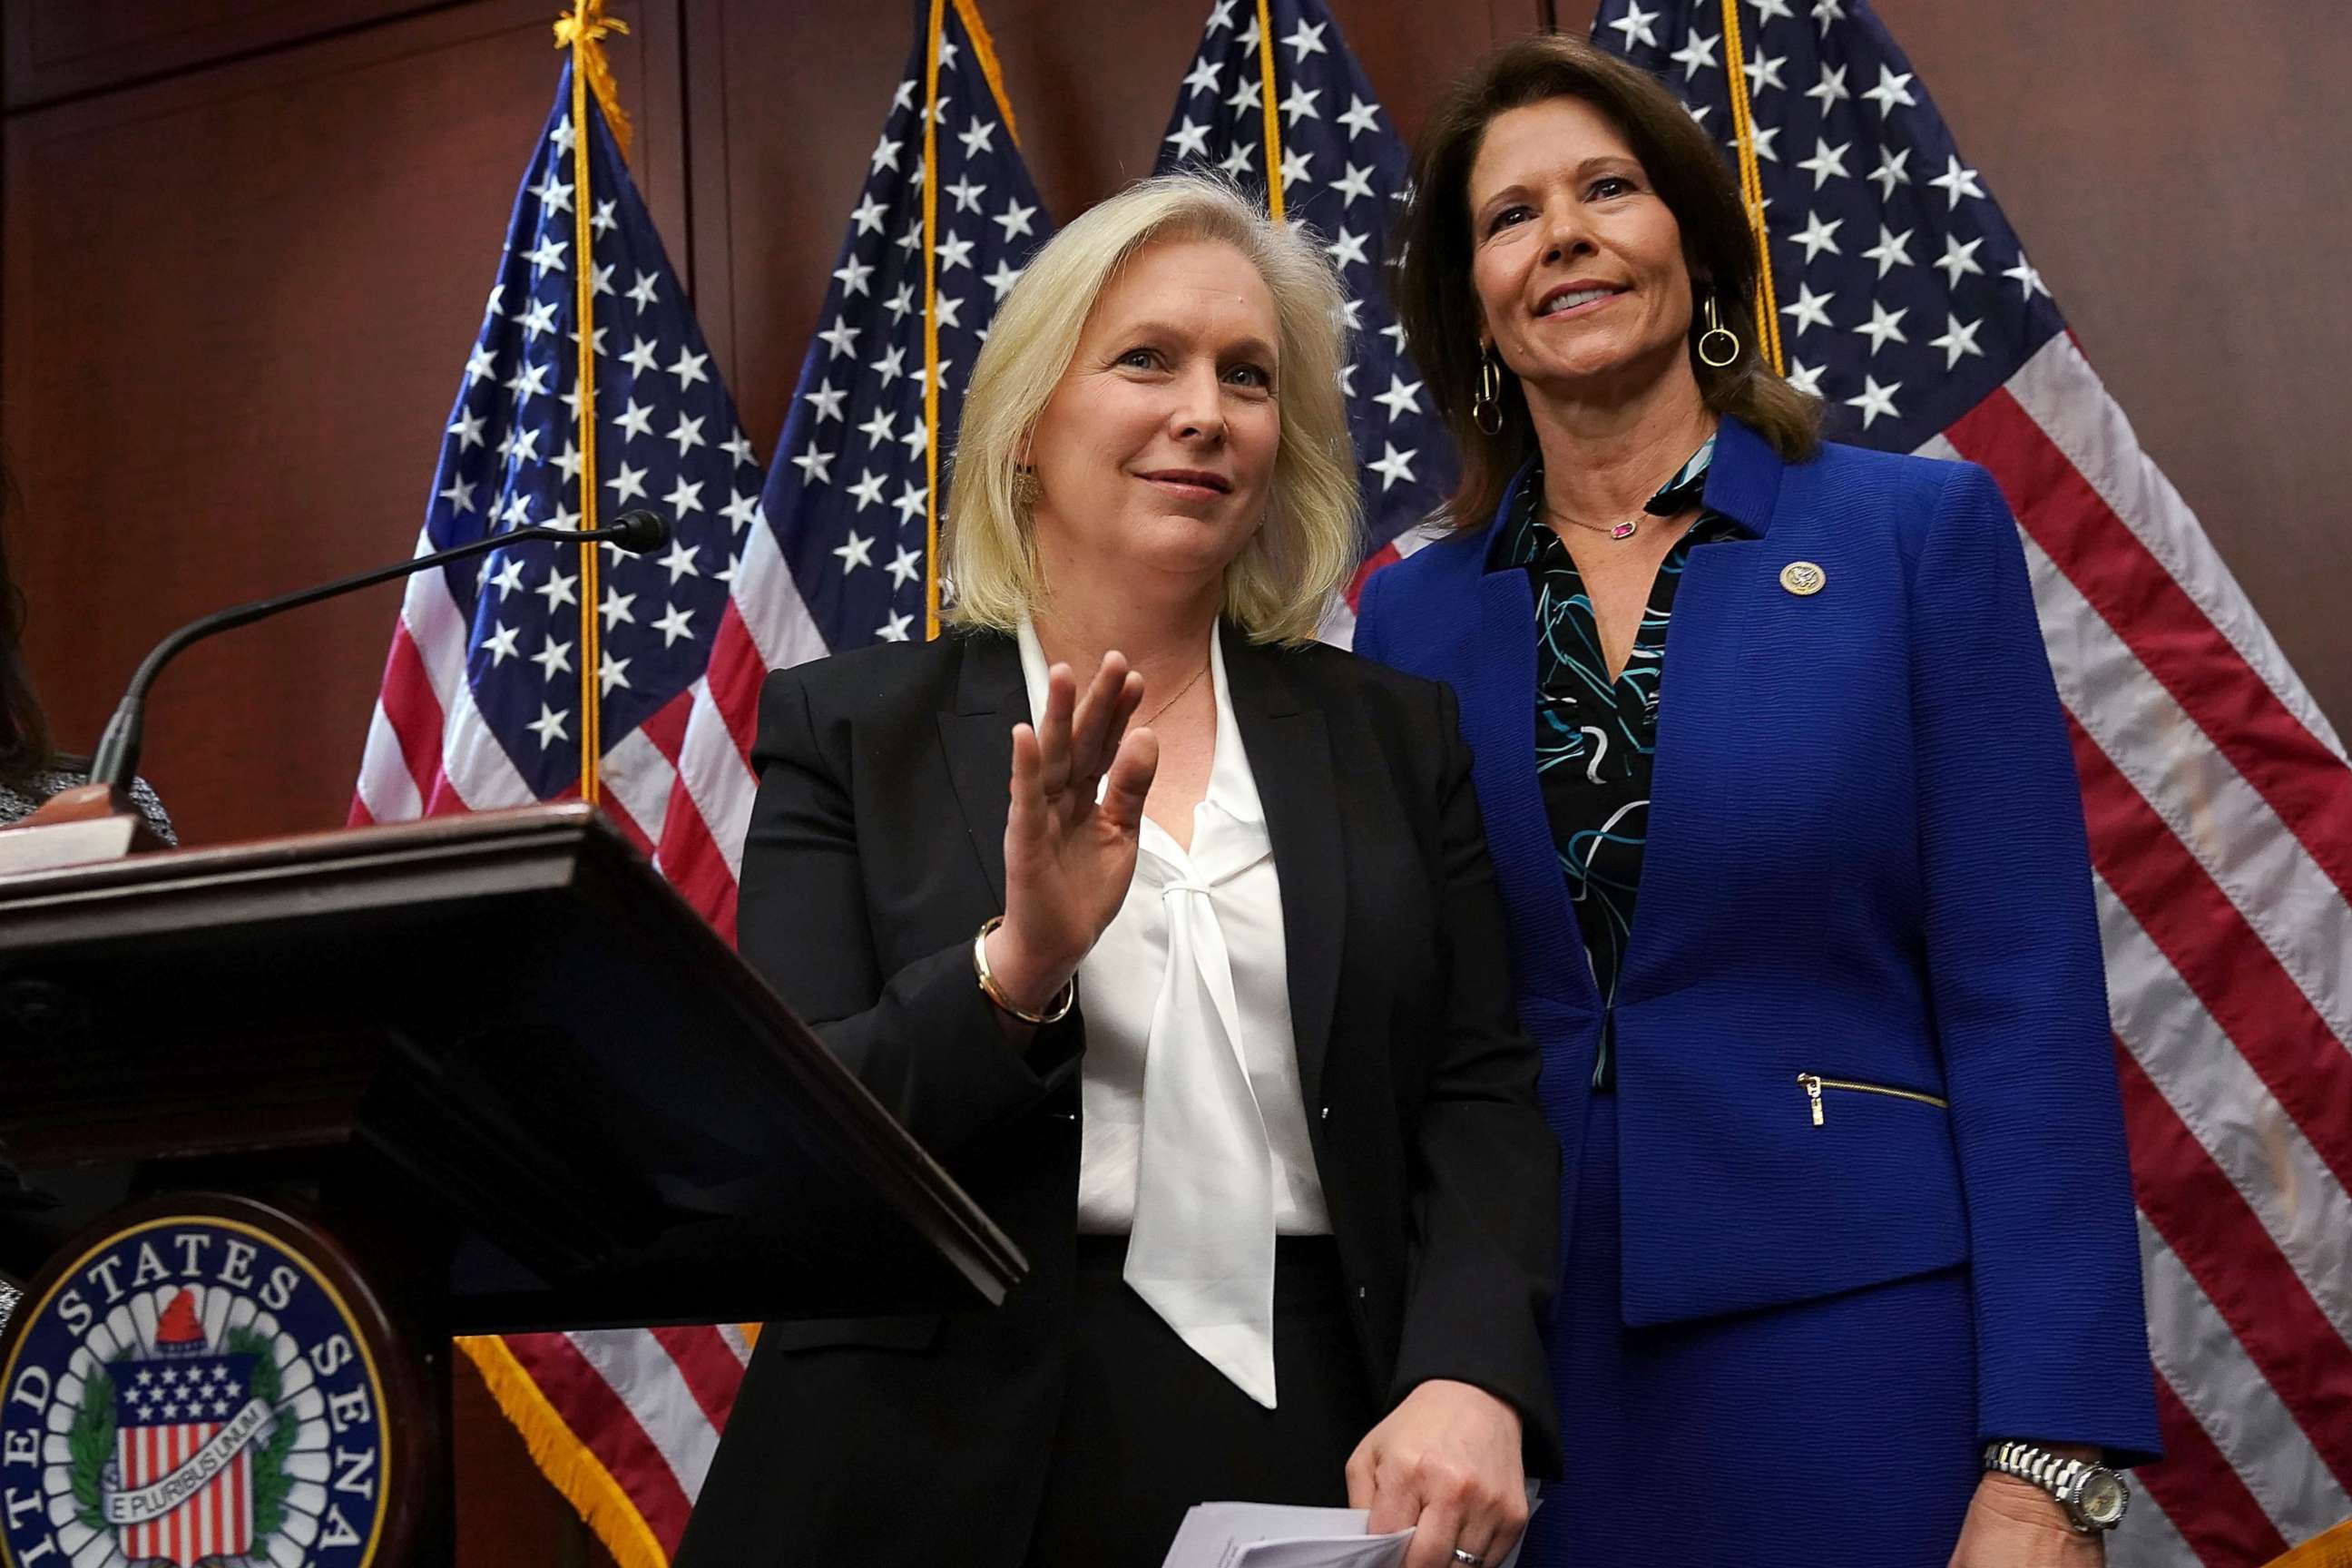 PHOTO: Sen. Kirsten Gillibrand, left, speaks, as Rep. Cheri Bustos listens, during a news conference, Dec. 6, 2017, on Capitol Hill in Washington.